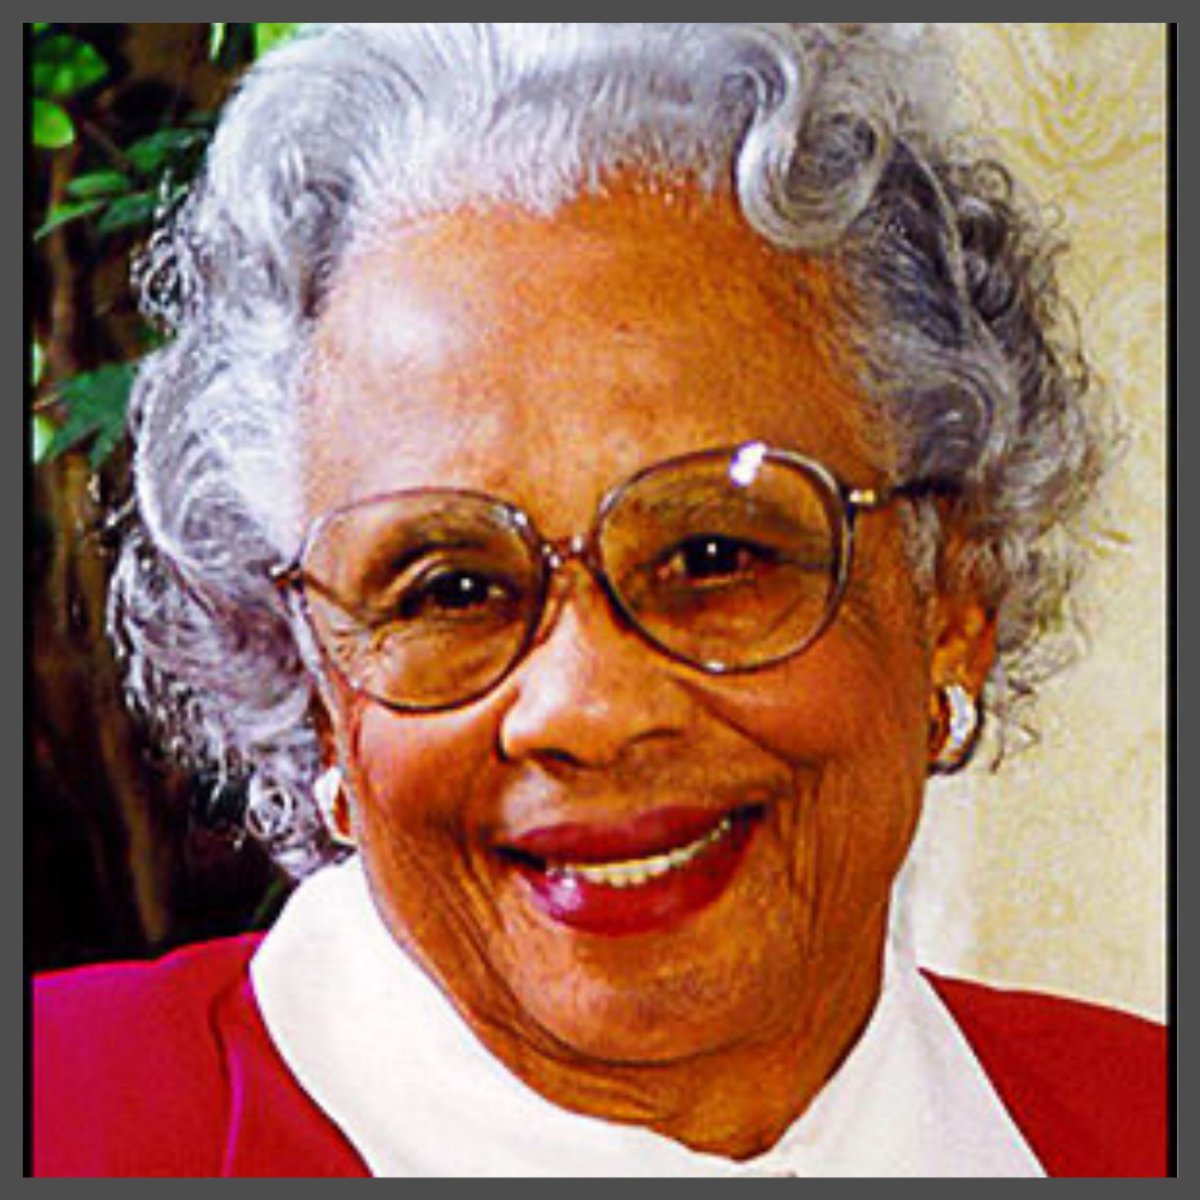 Dr. Catherine McKee-McCottry was born in Charlotte,NC in 1921. Catherine was the first Black woman in Charlotte to become a medical doctor in the 20th century. She was the first Black woman OBGYN in Charlotte NC. She is a graduate of Barber Scotia, JCSU, and Howard Med. #BHM  